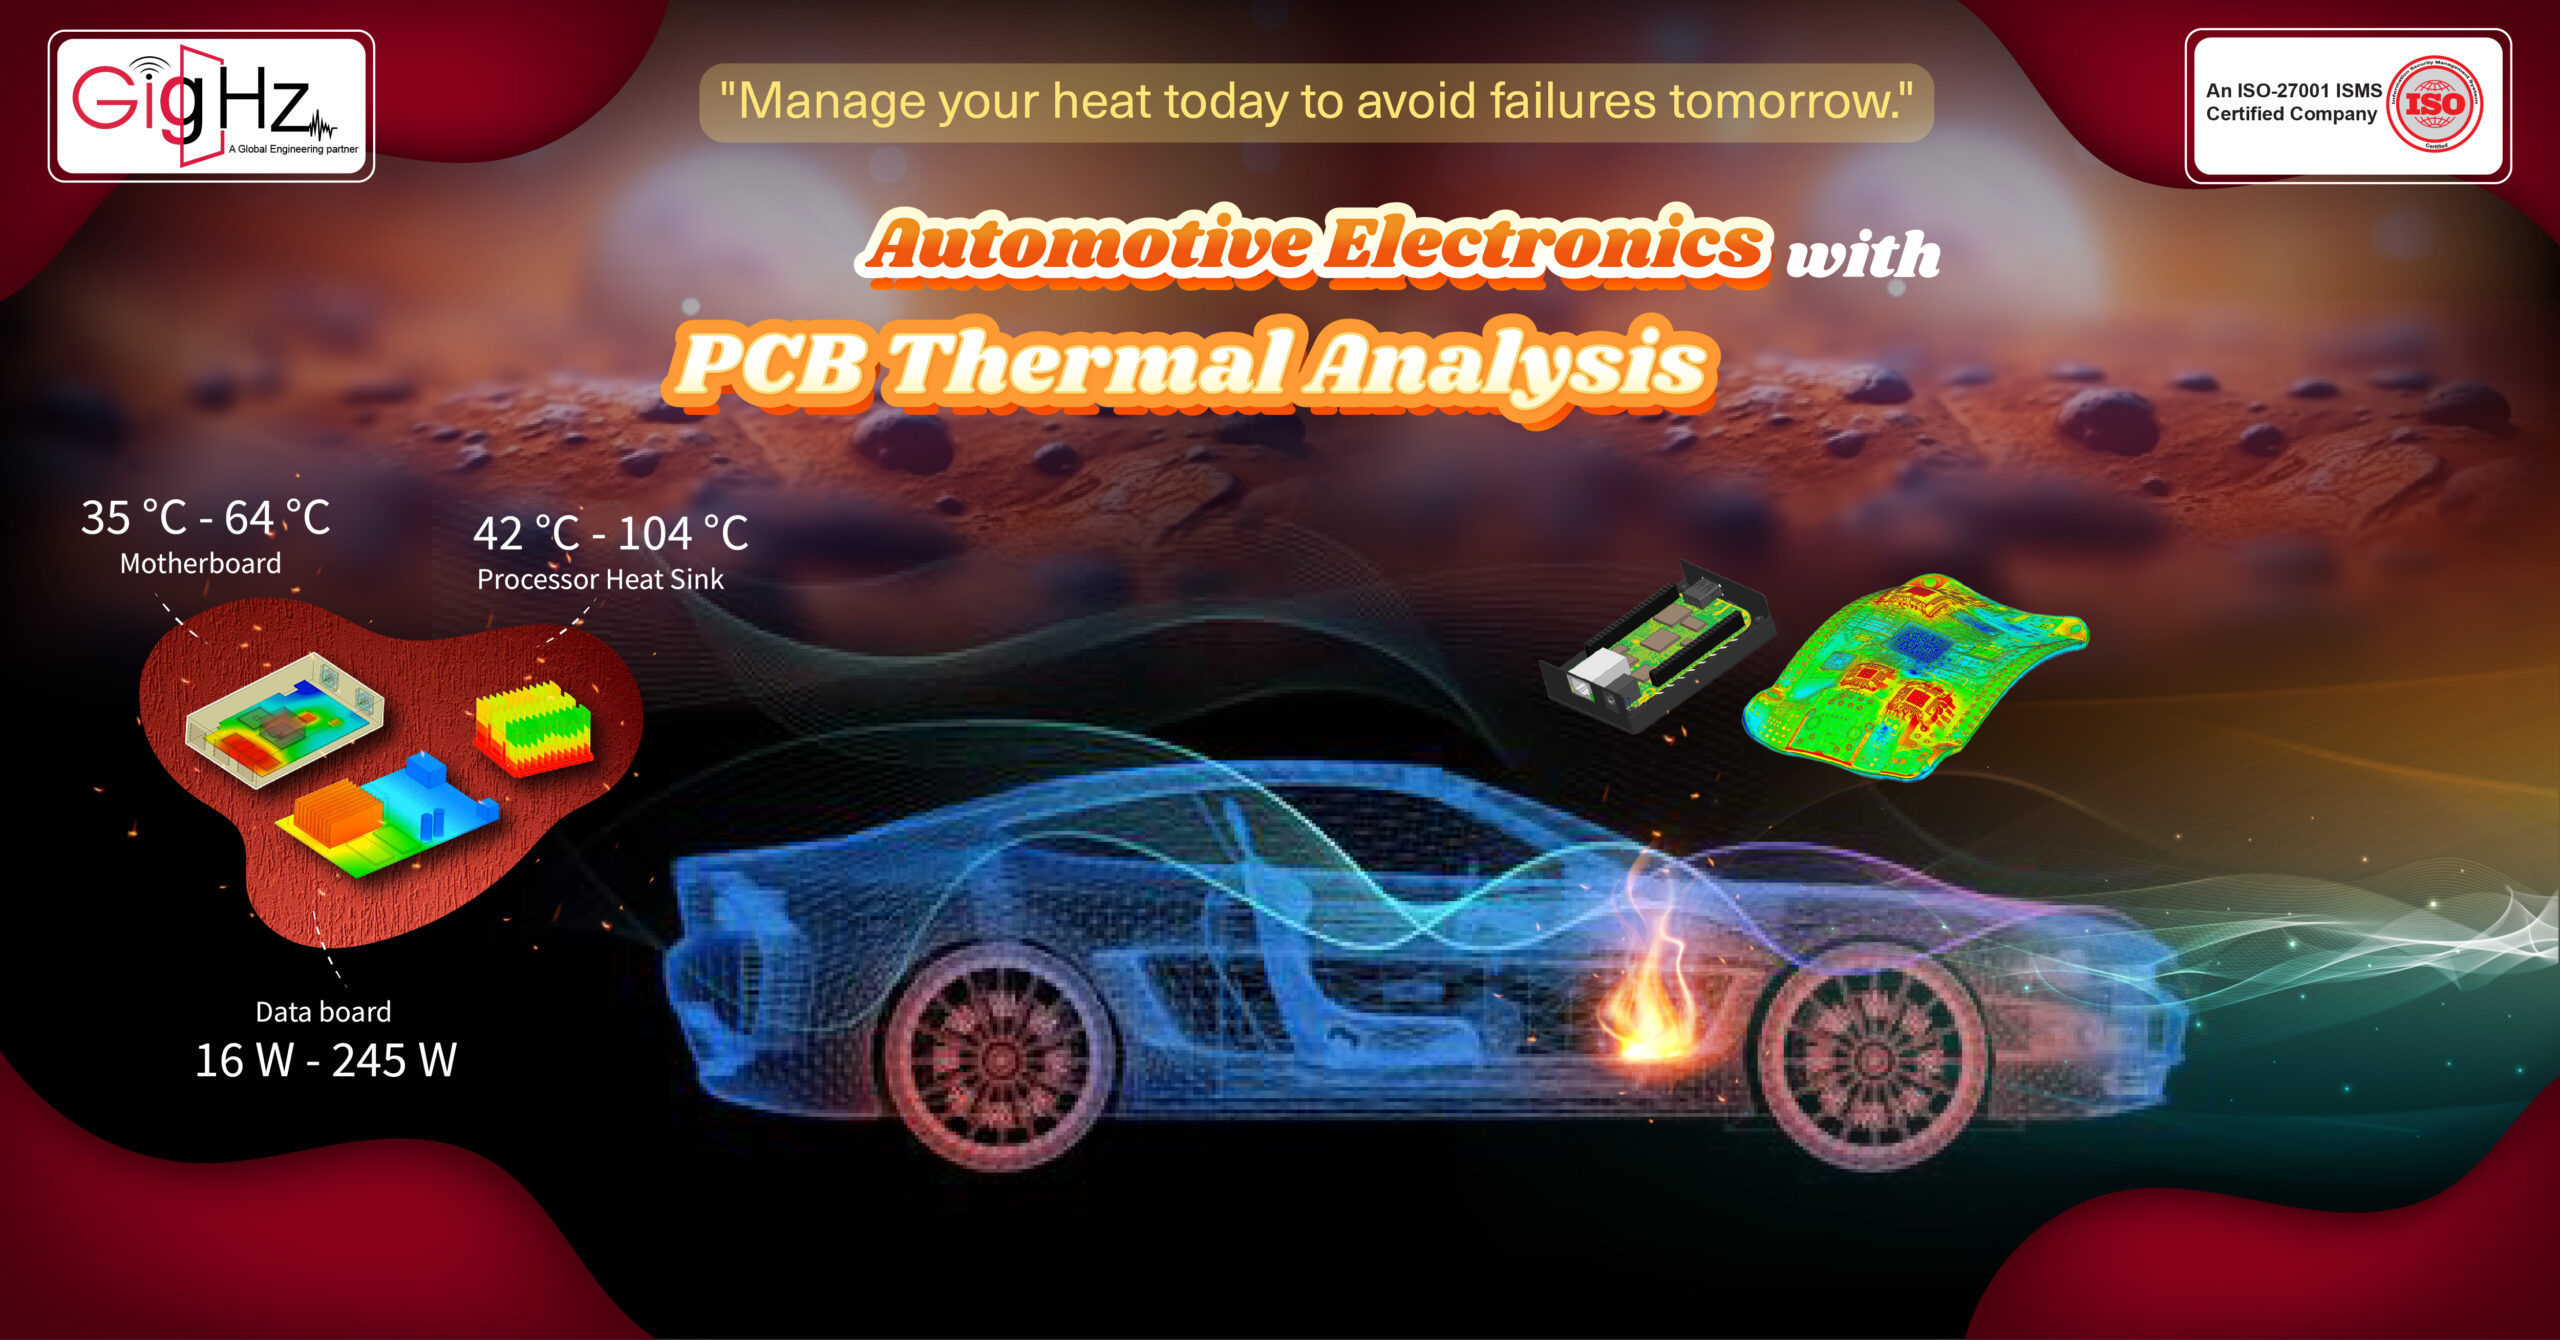 Keep Cool: Analyzing Automotive Electronics with PCB Thermal Analysis